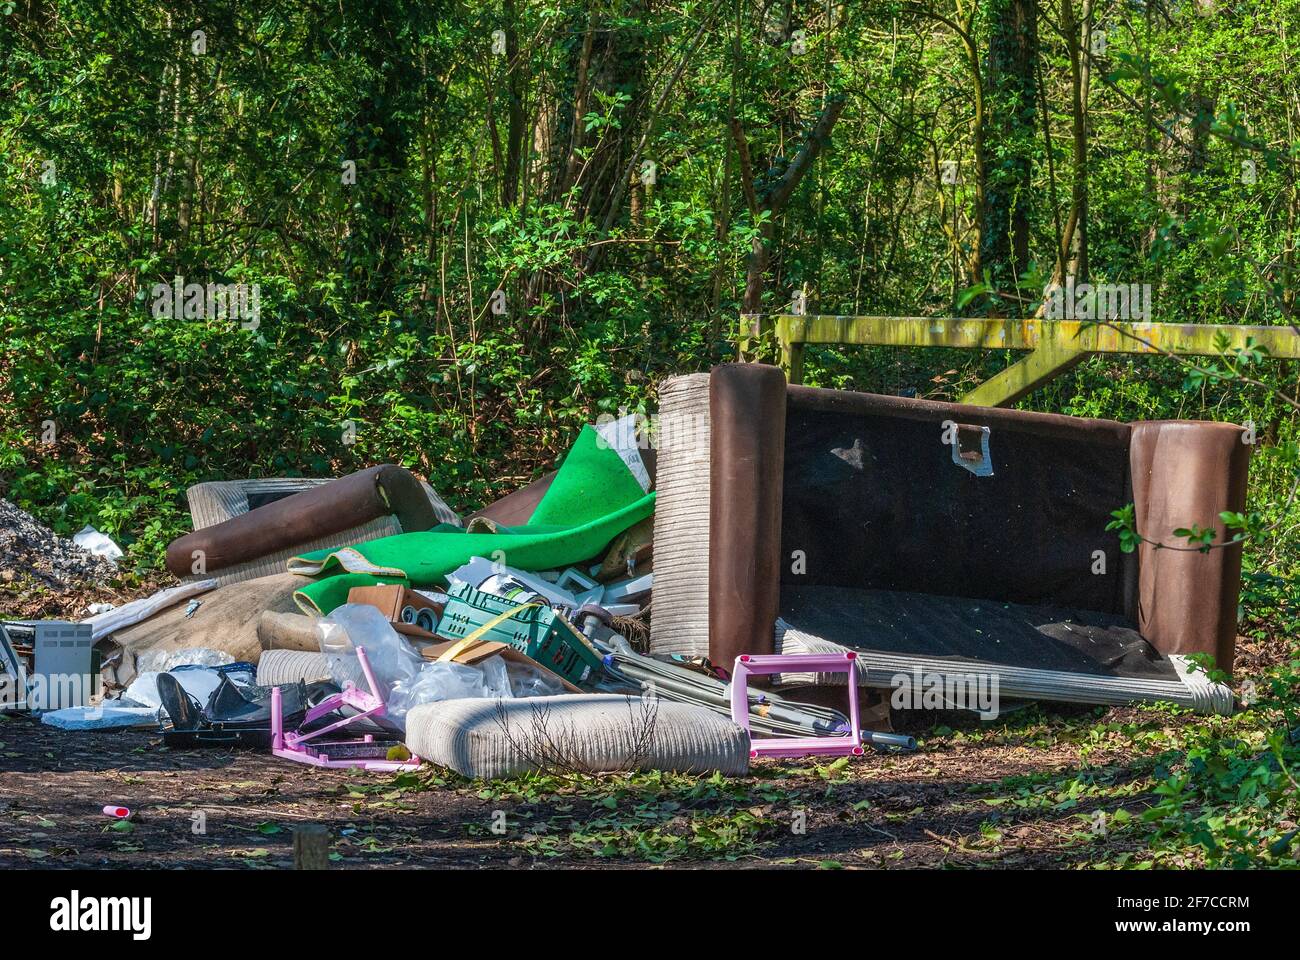 Illegally Fly tipped rubbish in a wooded area. Stock Photo